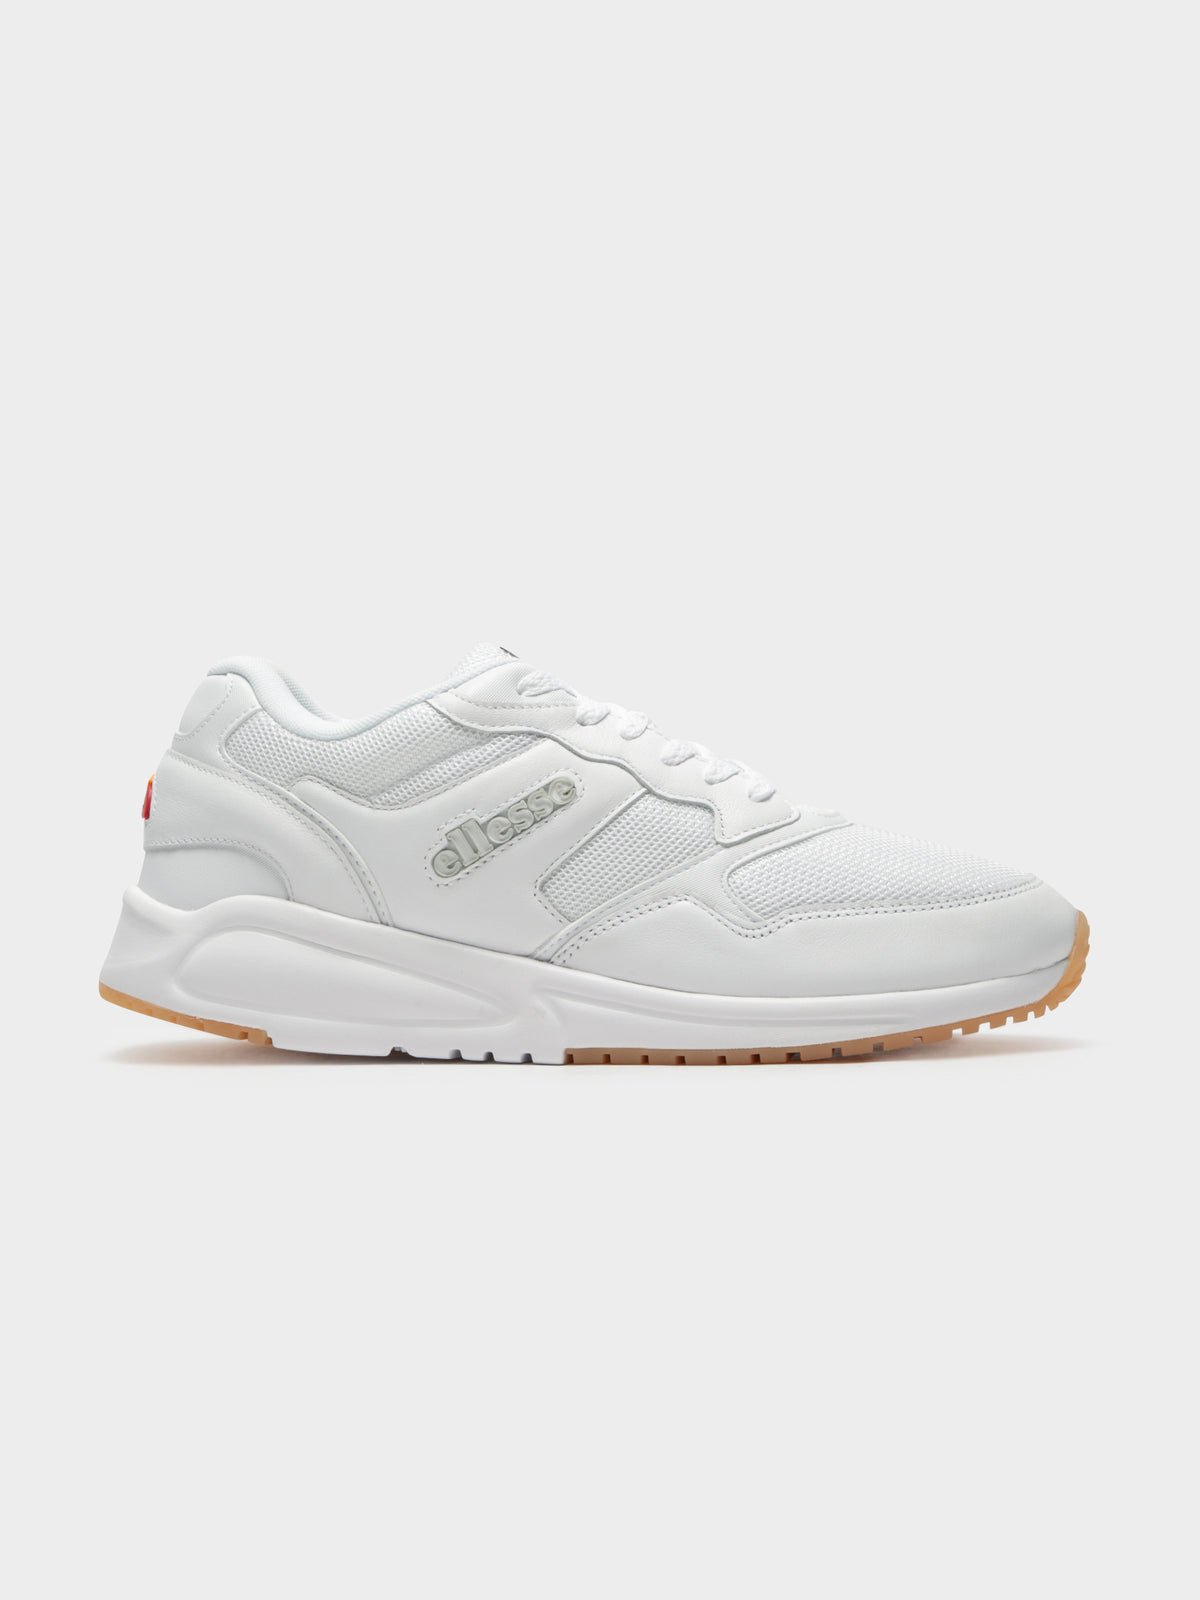 Womens NYC84 Sneakers in White